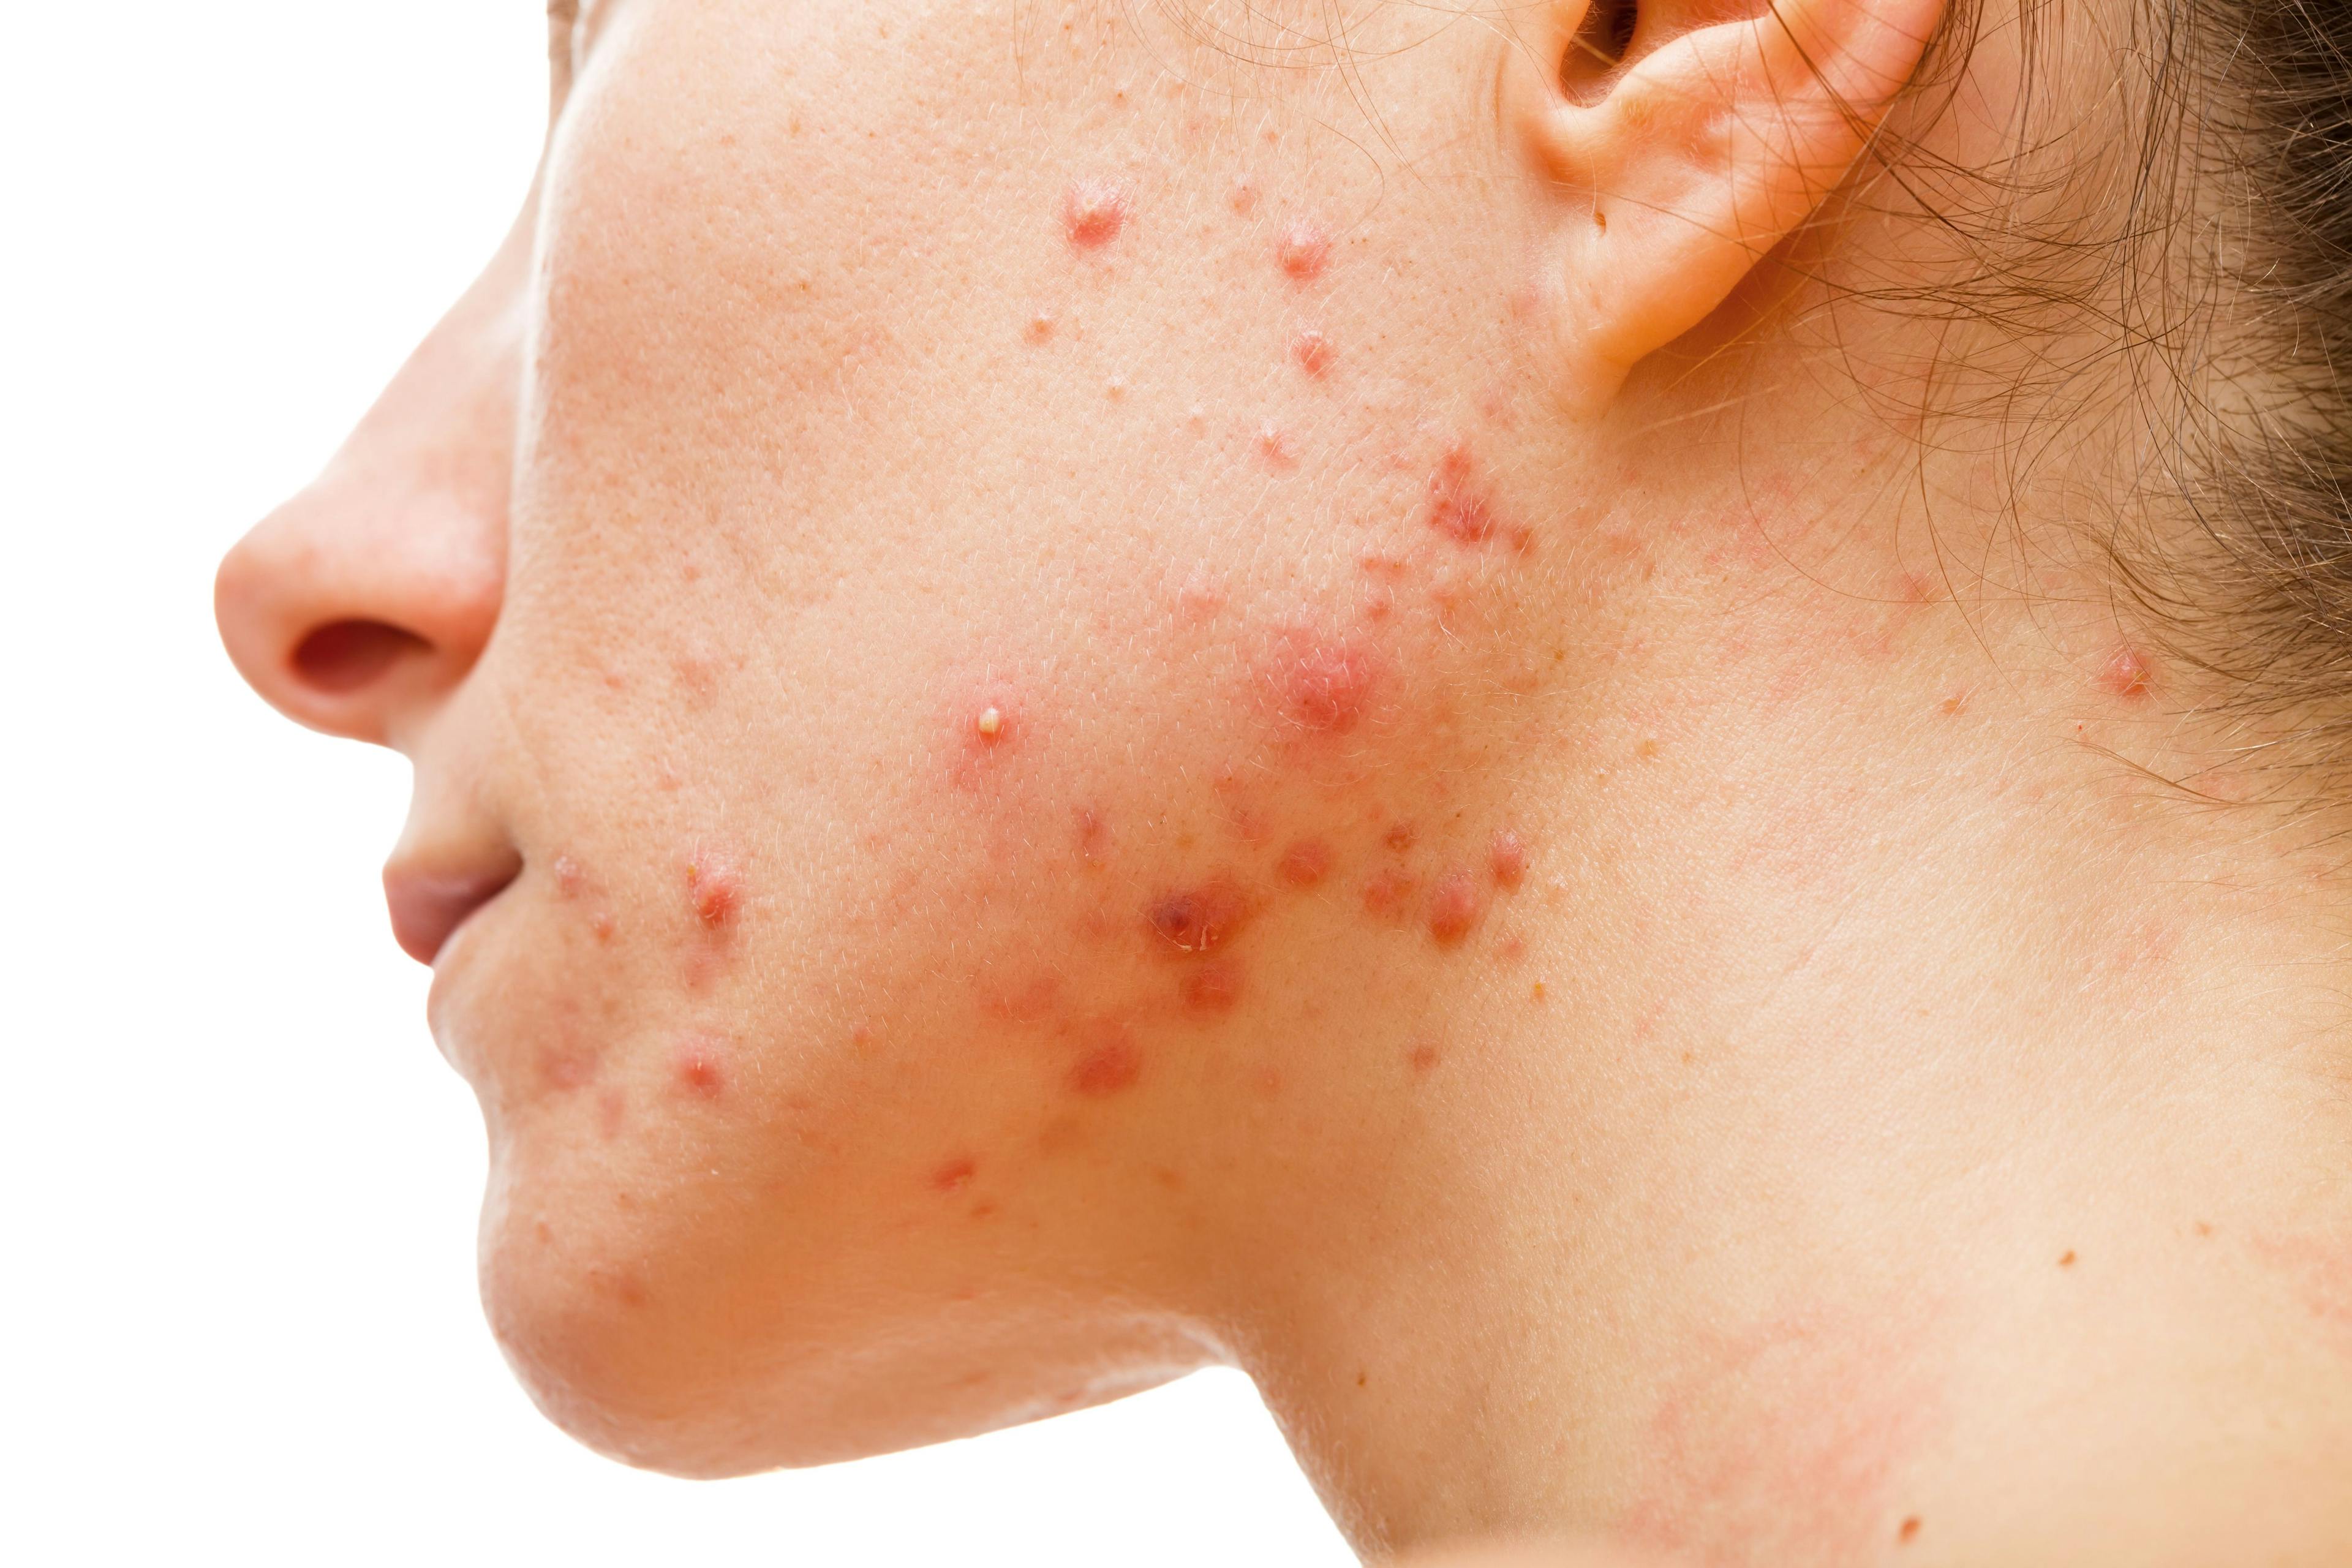 Study Evaluates Safety and Efficacy of Oral Zinc and Low-Dose Isotretinoin for Acne Vulgaris 